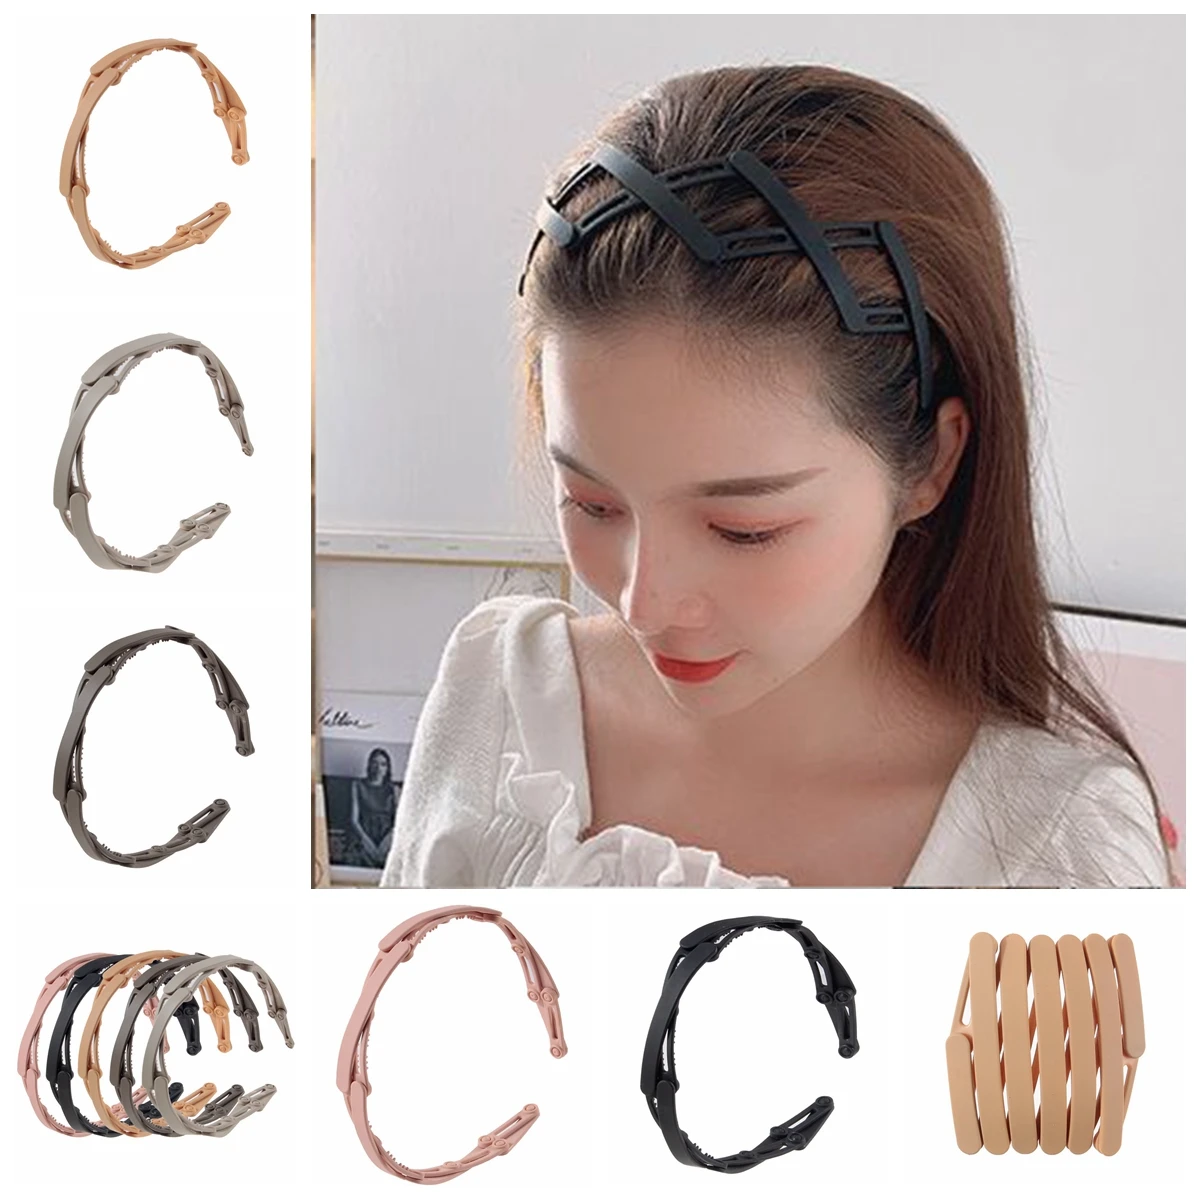 New Girls Foldable Non-slip Plastic Hairband Women Flexible Hair Band for Out Door Easy to Carry